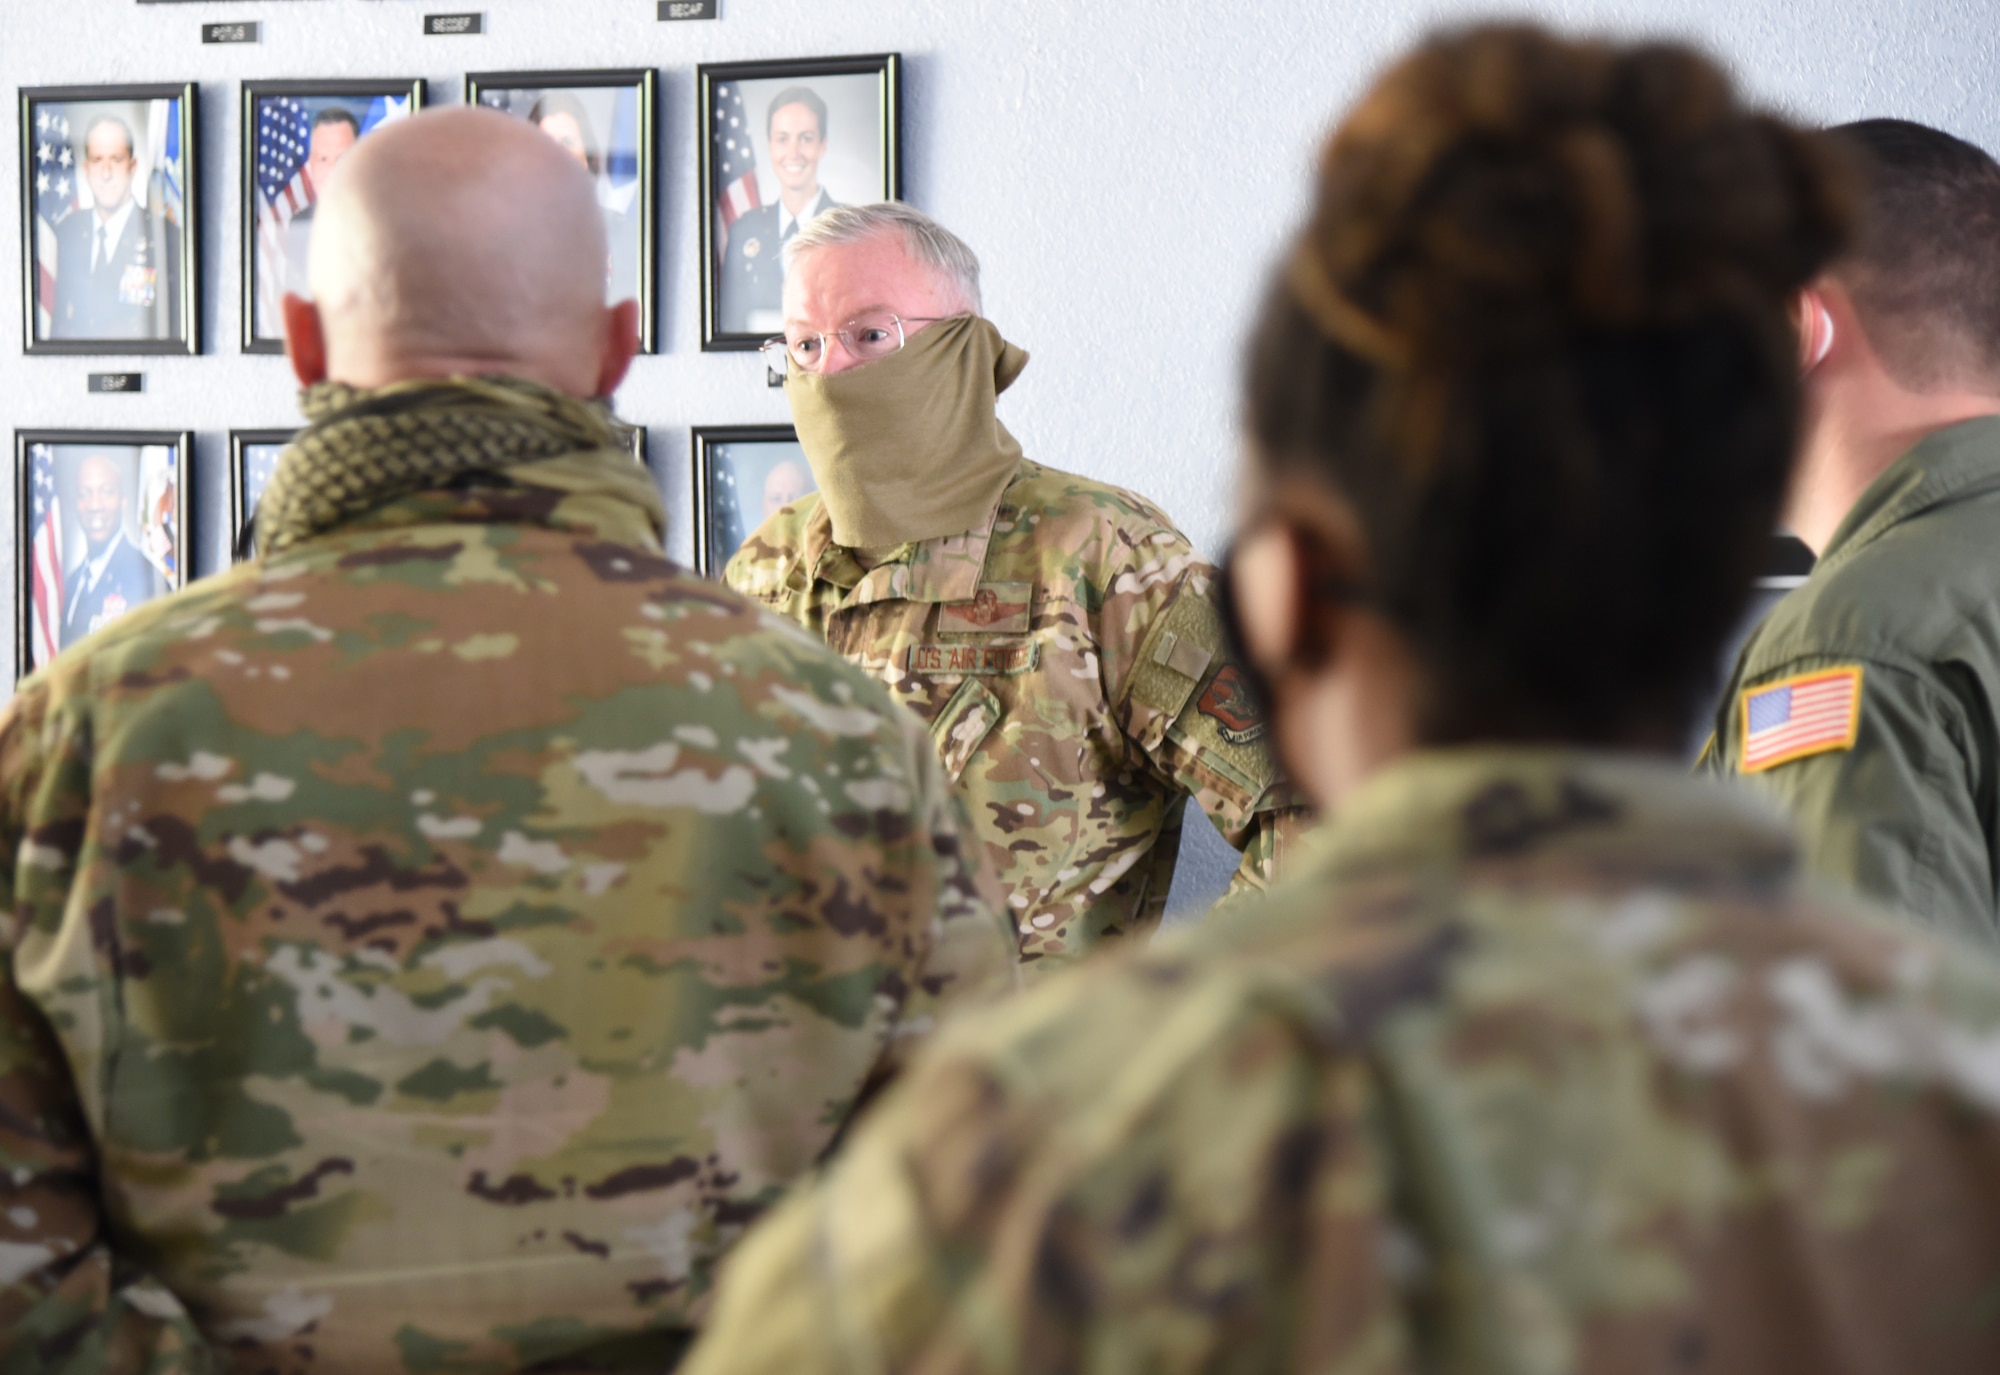 Col. Jeffrey A. Van Dootingh, 403rd Wing commander, addresses approximately 10 Airmen with the 403rd Wing's 36th Aeromedical Evacuation Squadron prior to their departure April 15, 2020. The Reserve Citizen Airmen were mobilized to support COVID-19 relief efforts. These reservists will provide life-saving in-flight patient care. (U.S. Air Force photo by Lt. Col. Marnee A.C. Losurdo)